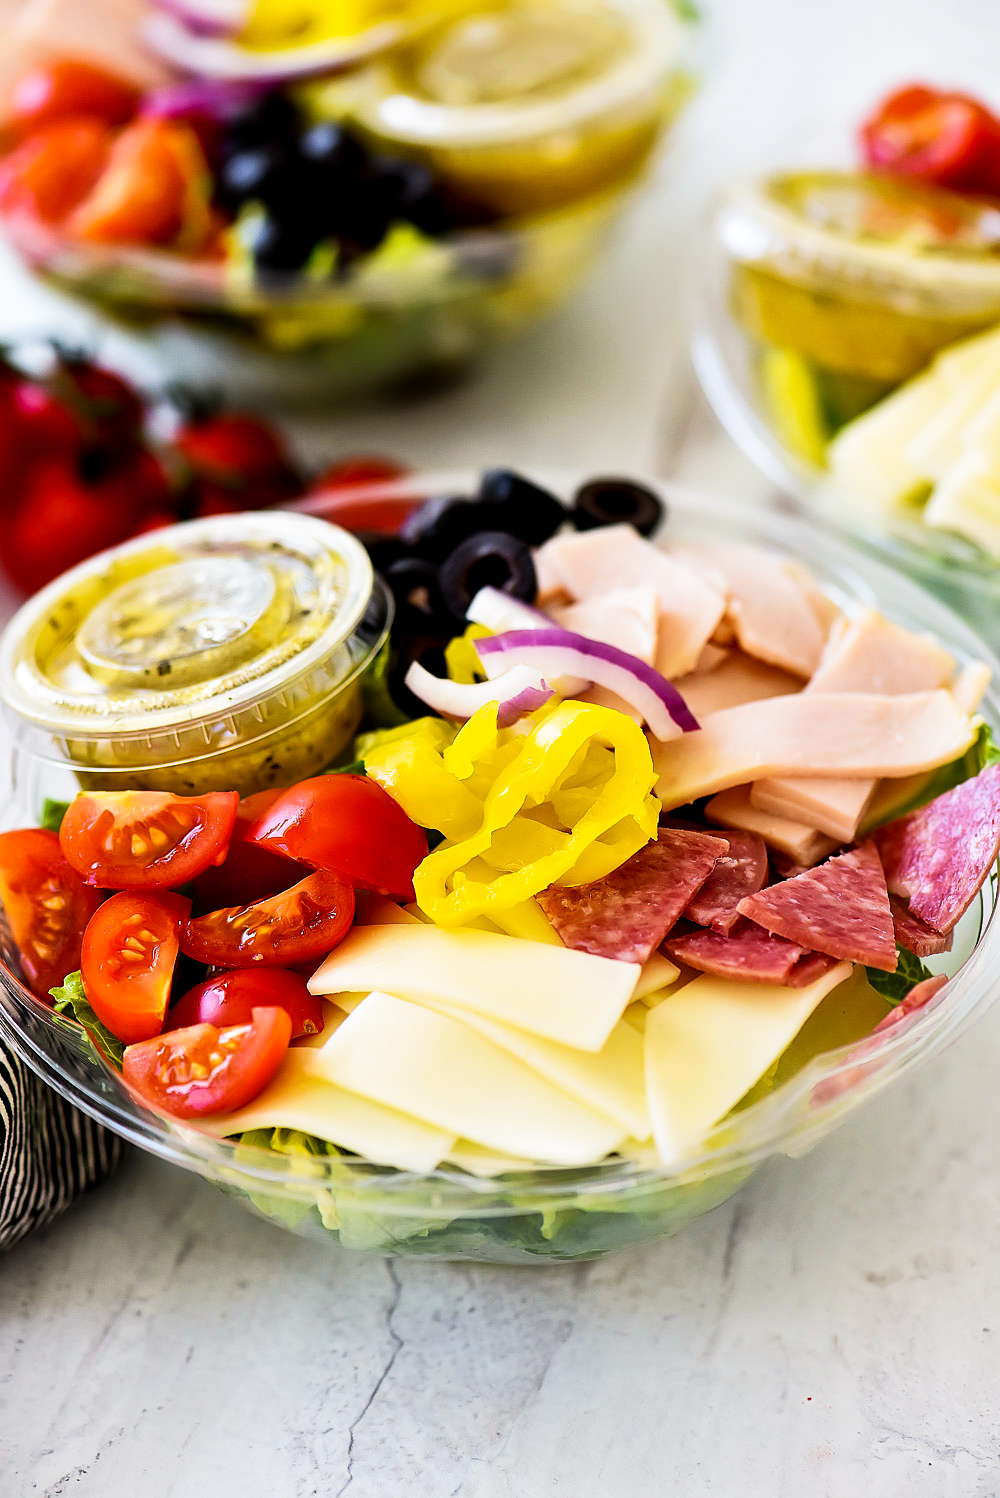 Italian Sub Salad is filled with sliced turkey, salami, provolone cheese, banana peppers, sliced olives and cherry tomatoes. Life-in-the-Lofthouse.com